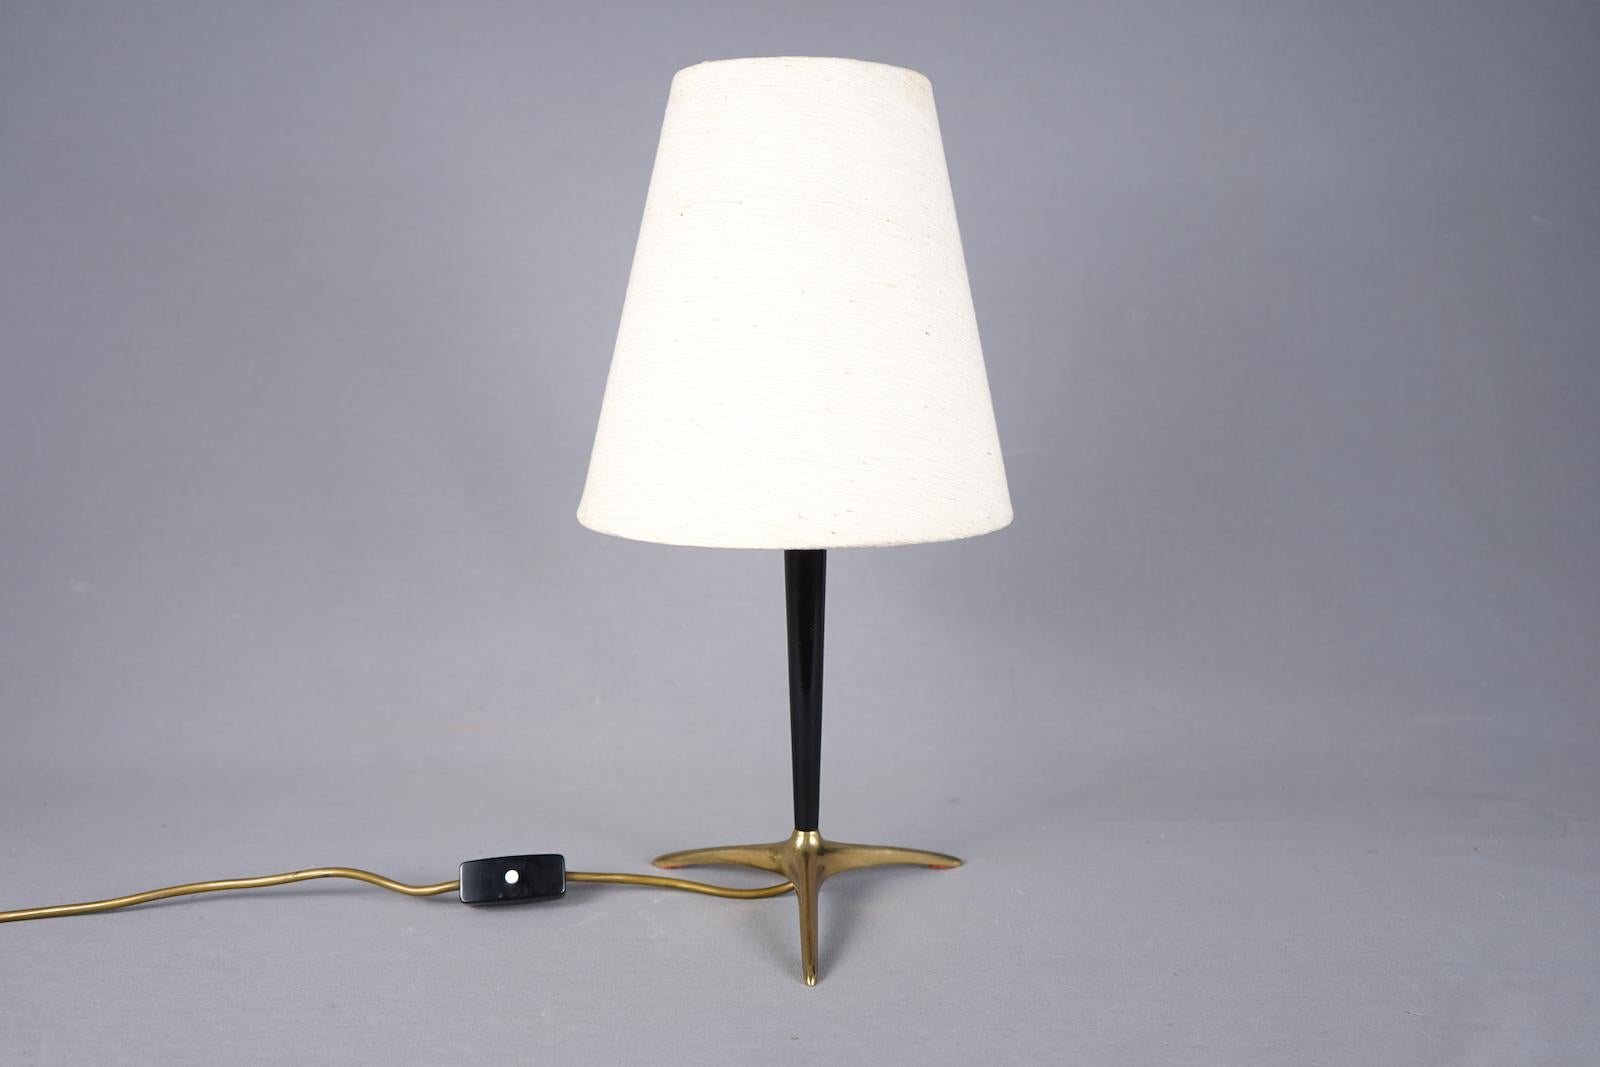 50s table lamp with black lacquered brass shaft and a crow's foot. 
Good condition.

 

Details

Creator: unknown
Period: circa 1950s
Color: Gold, black
Style: Mid-Century Modern
Place of Origin: Italy
Dimensions: Height: 18.50 in. (47